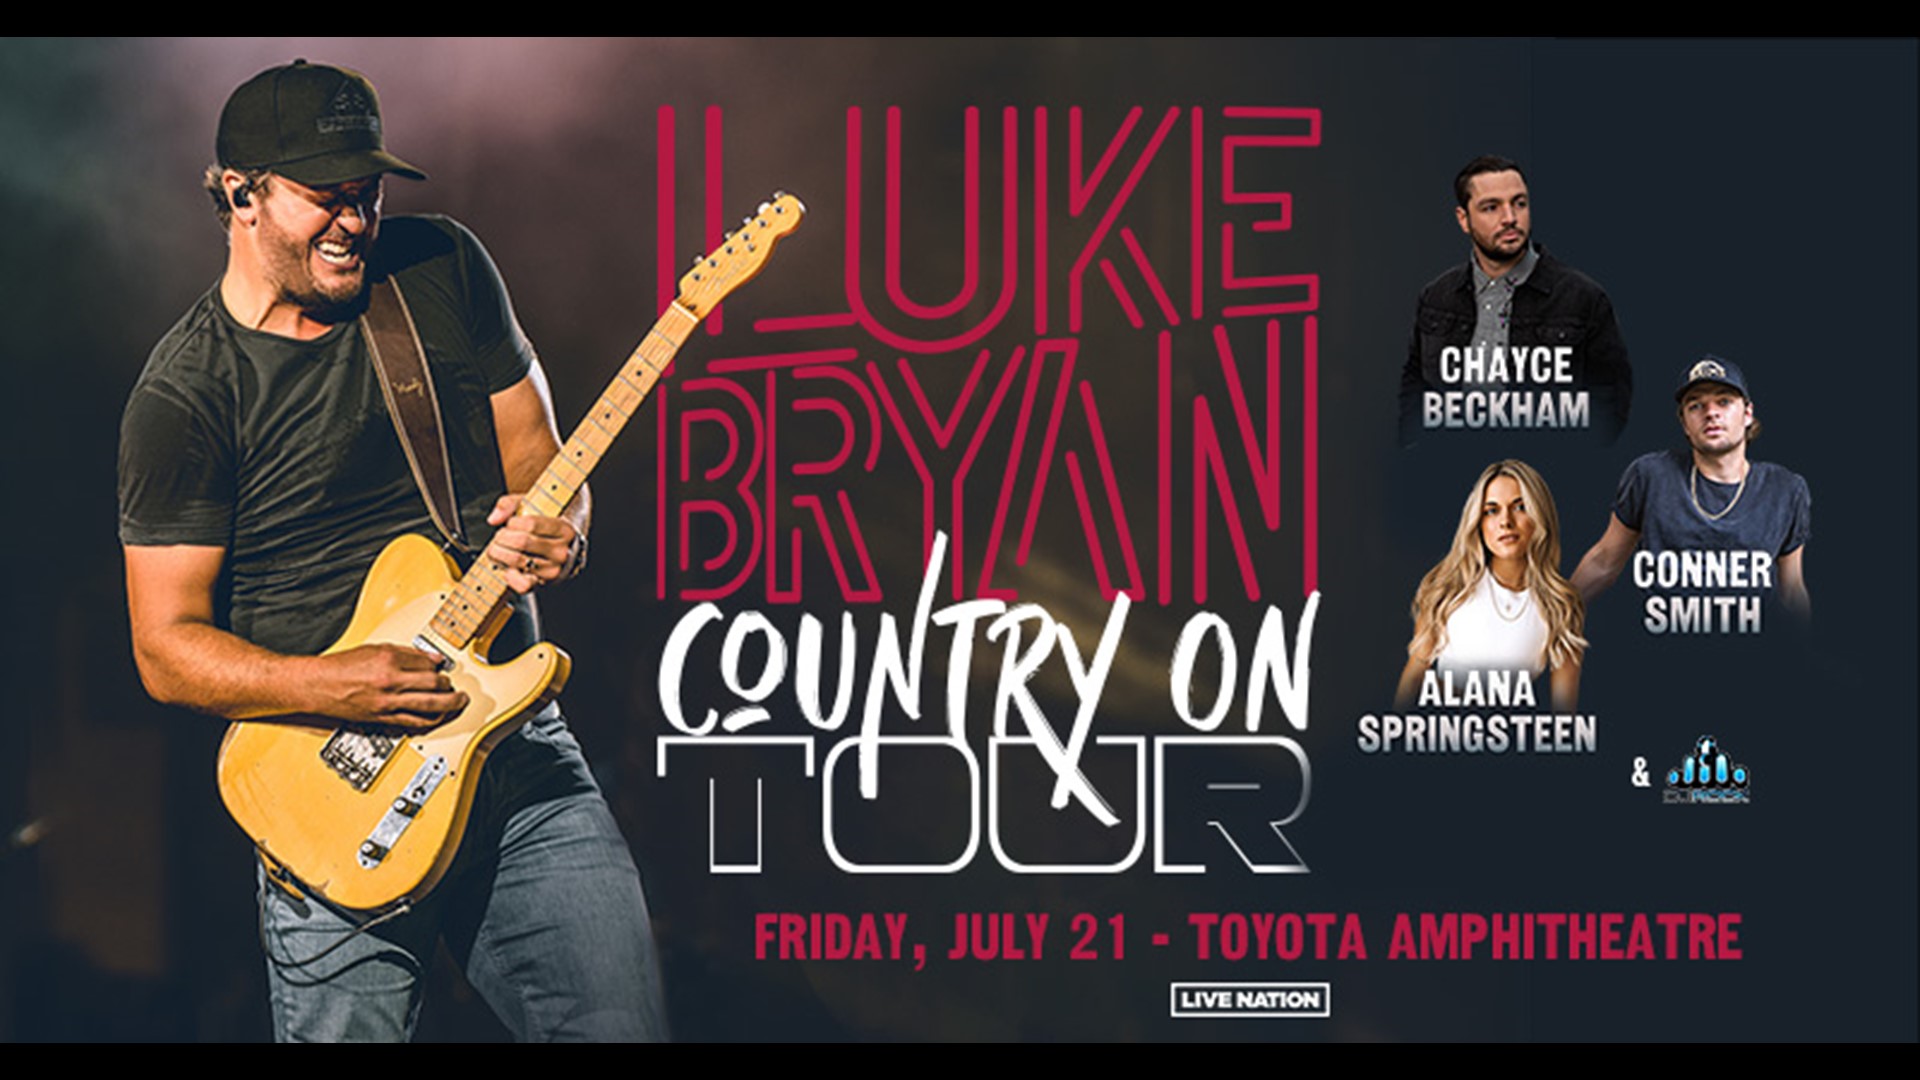 Enter to win tickets to Luke Bryan Country on Tour